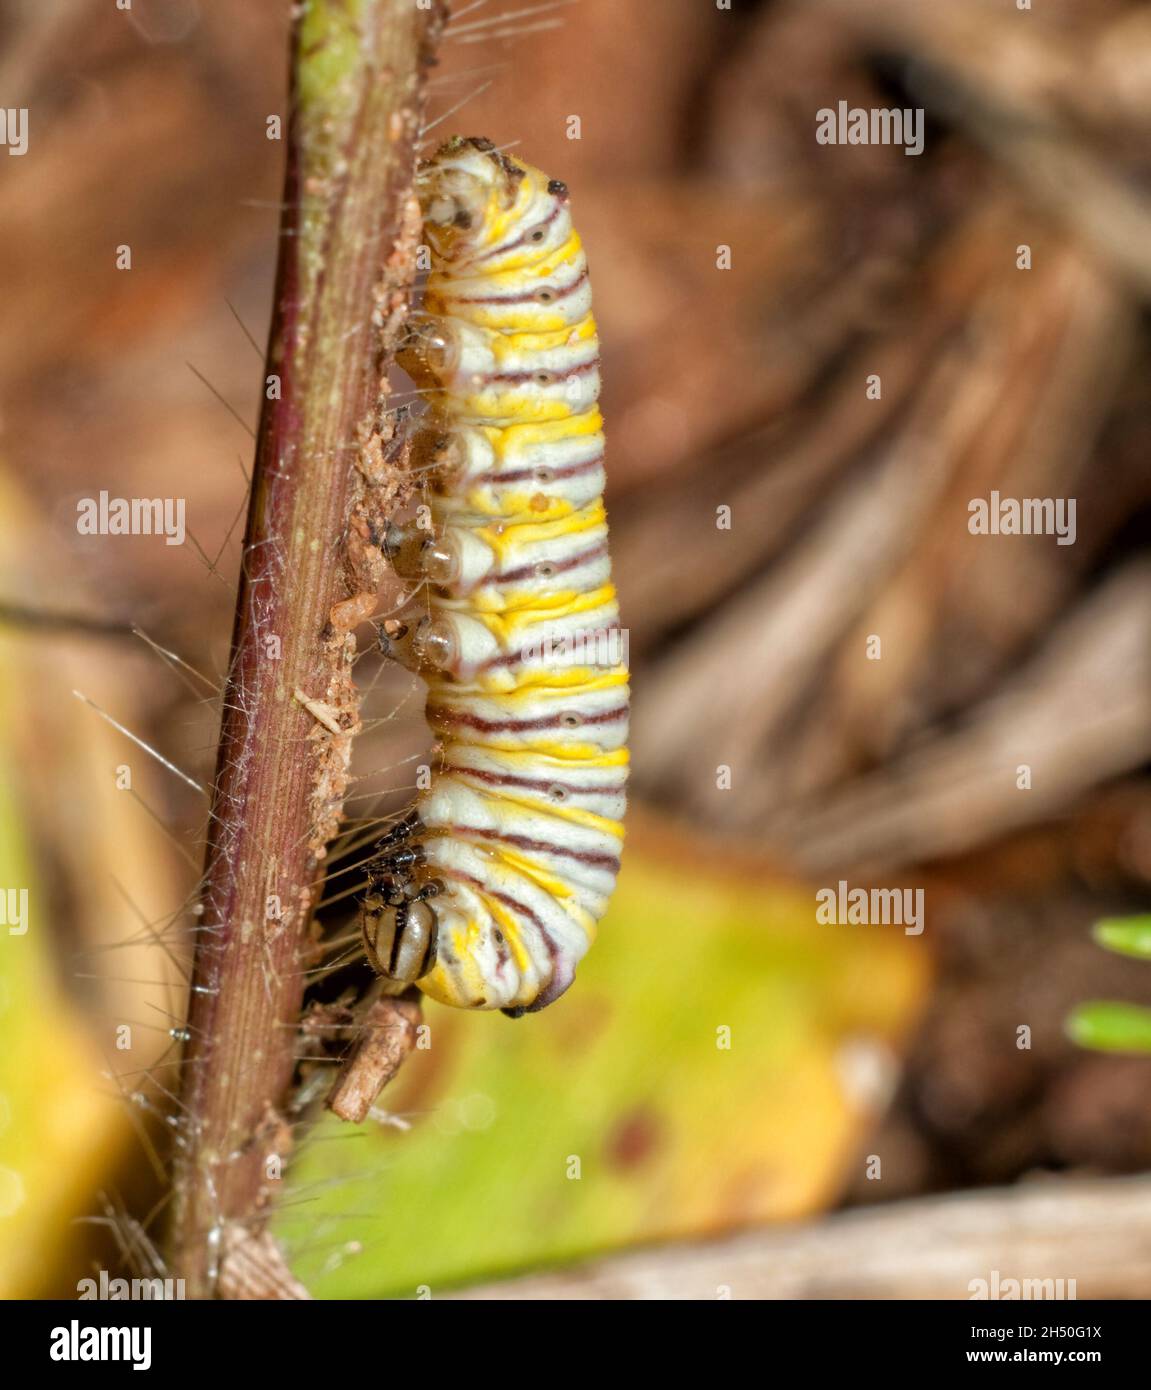 Young Monarch butterfly caterpillar in process of shedding its skin and transforming into next instar; with its faceplate already loose and transparen Stock Photo